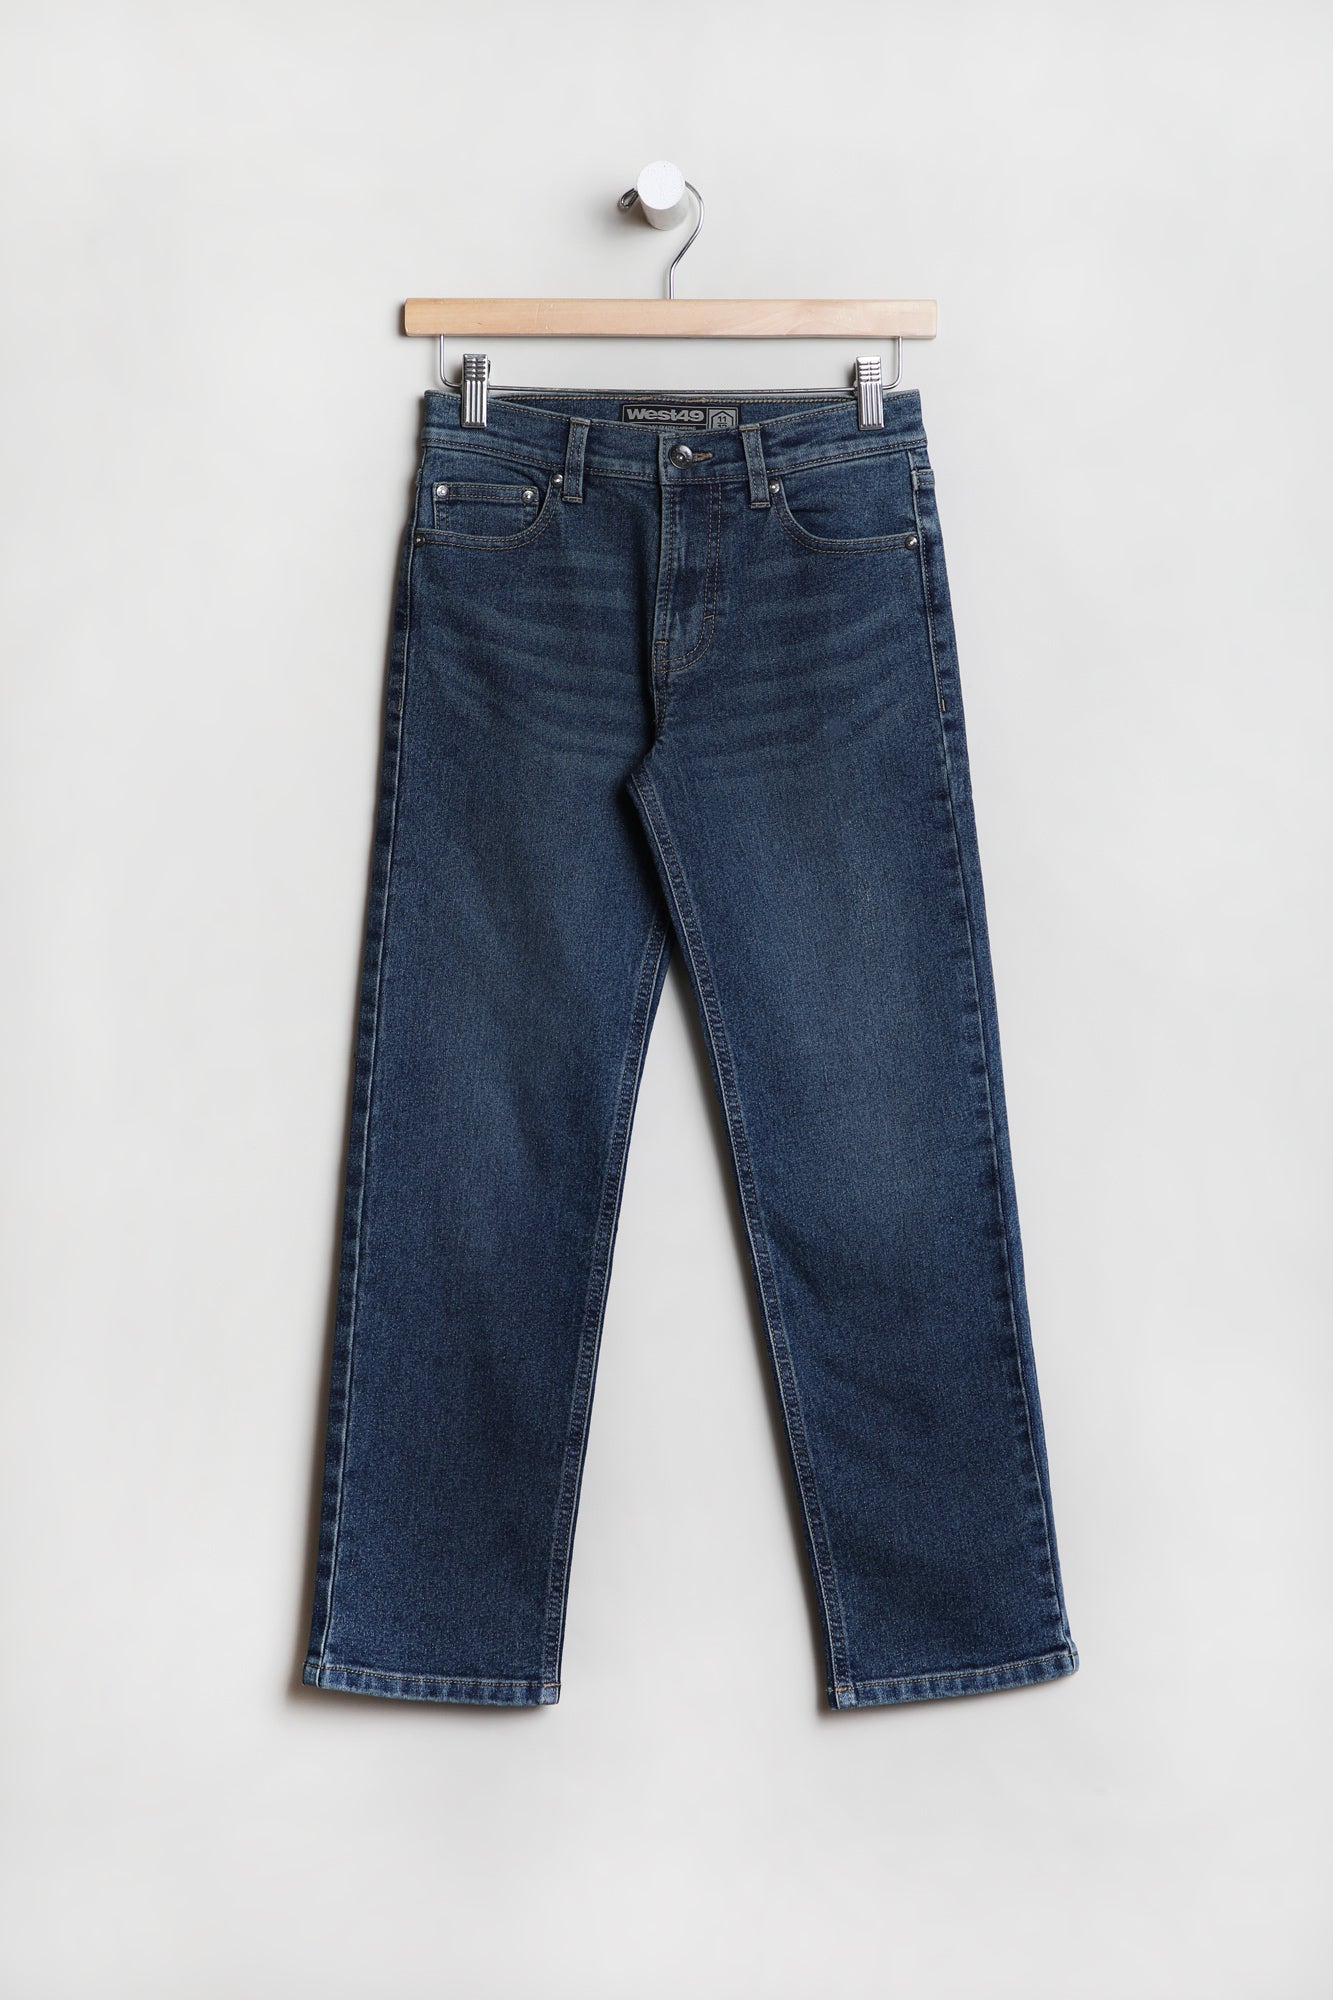 West49 Youth Dark Stone Relaxed Jeans - Navy Blue /